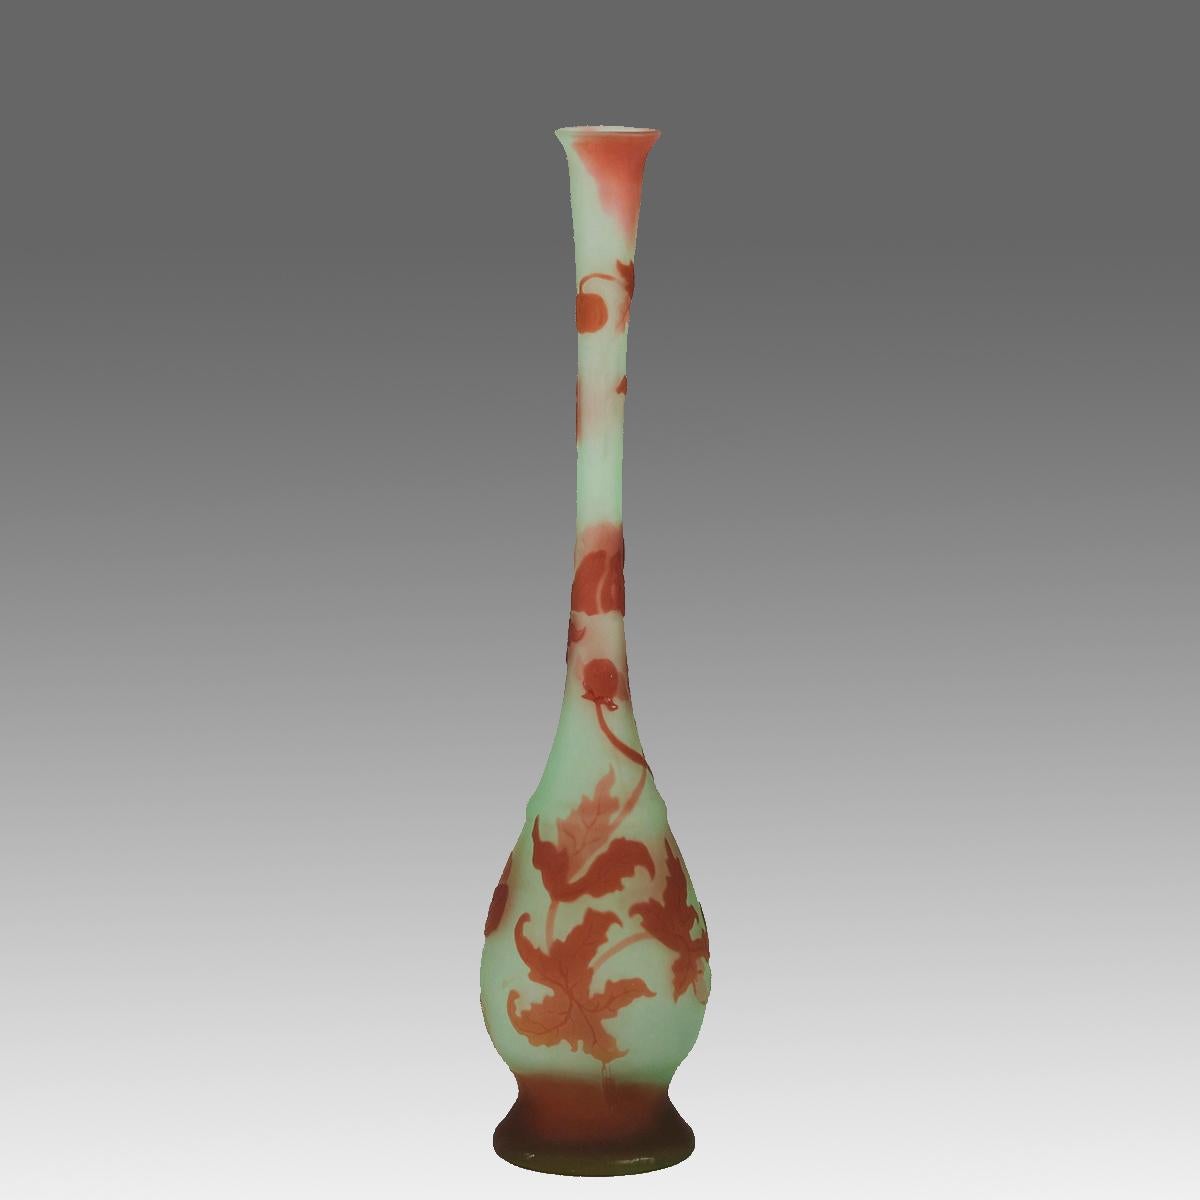 An unusual late French Art Nouveau tall slender cameo glass vase decorated with raised deep orange falling leaves against a mint green field. Exhibiting excellent detail and colour, signed Galle in cameo.

ADDITIONAL INFORMATION
Height:             